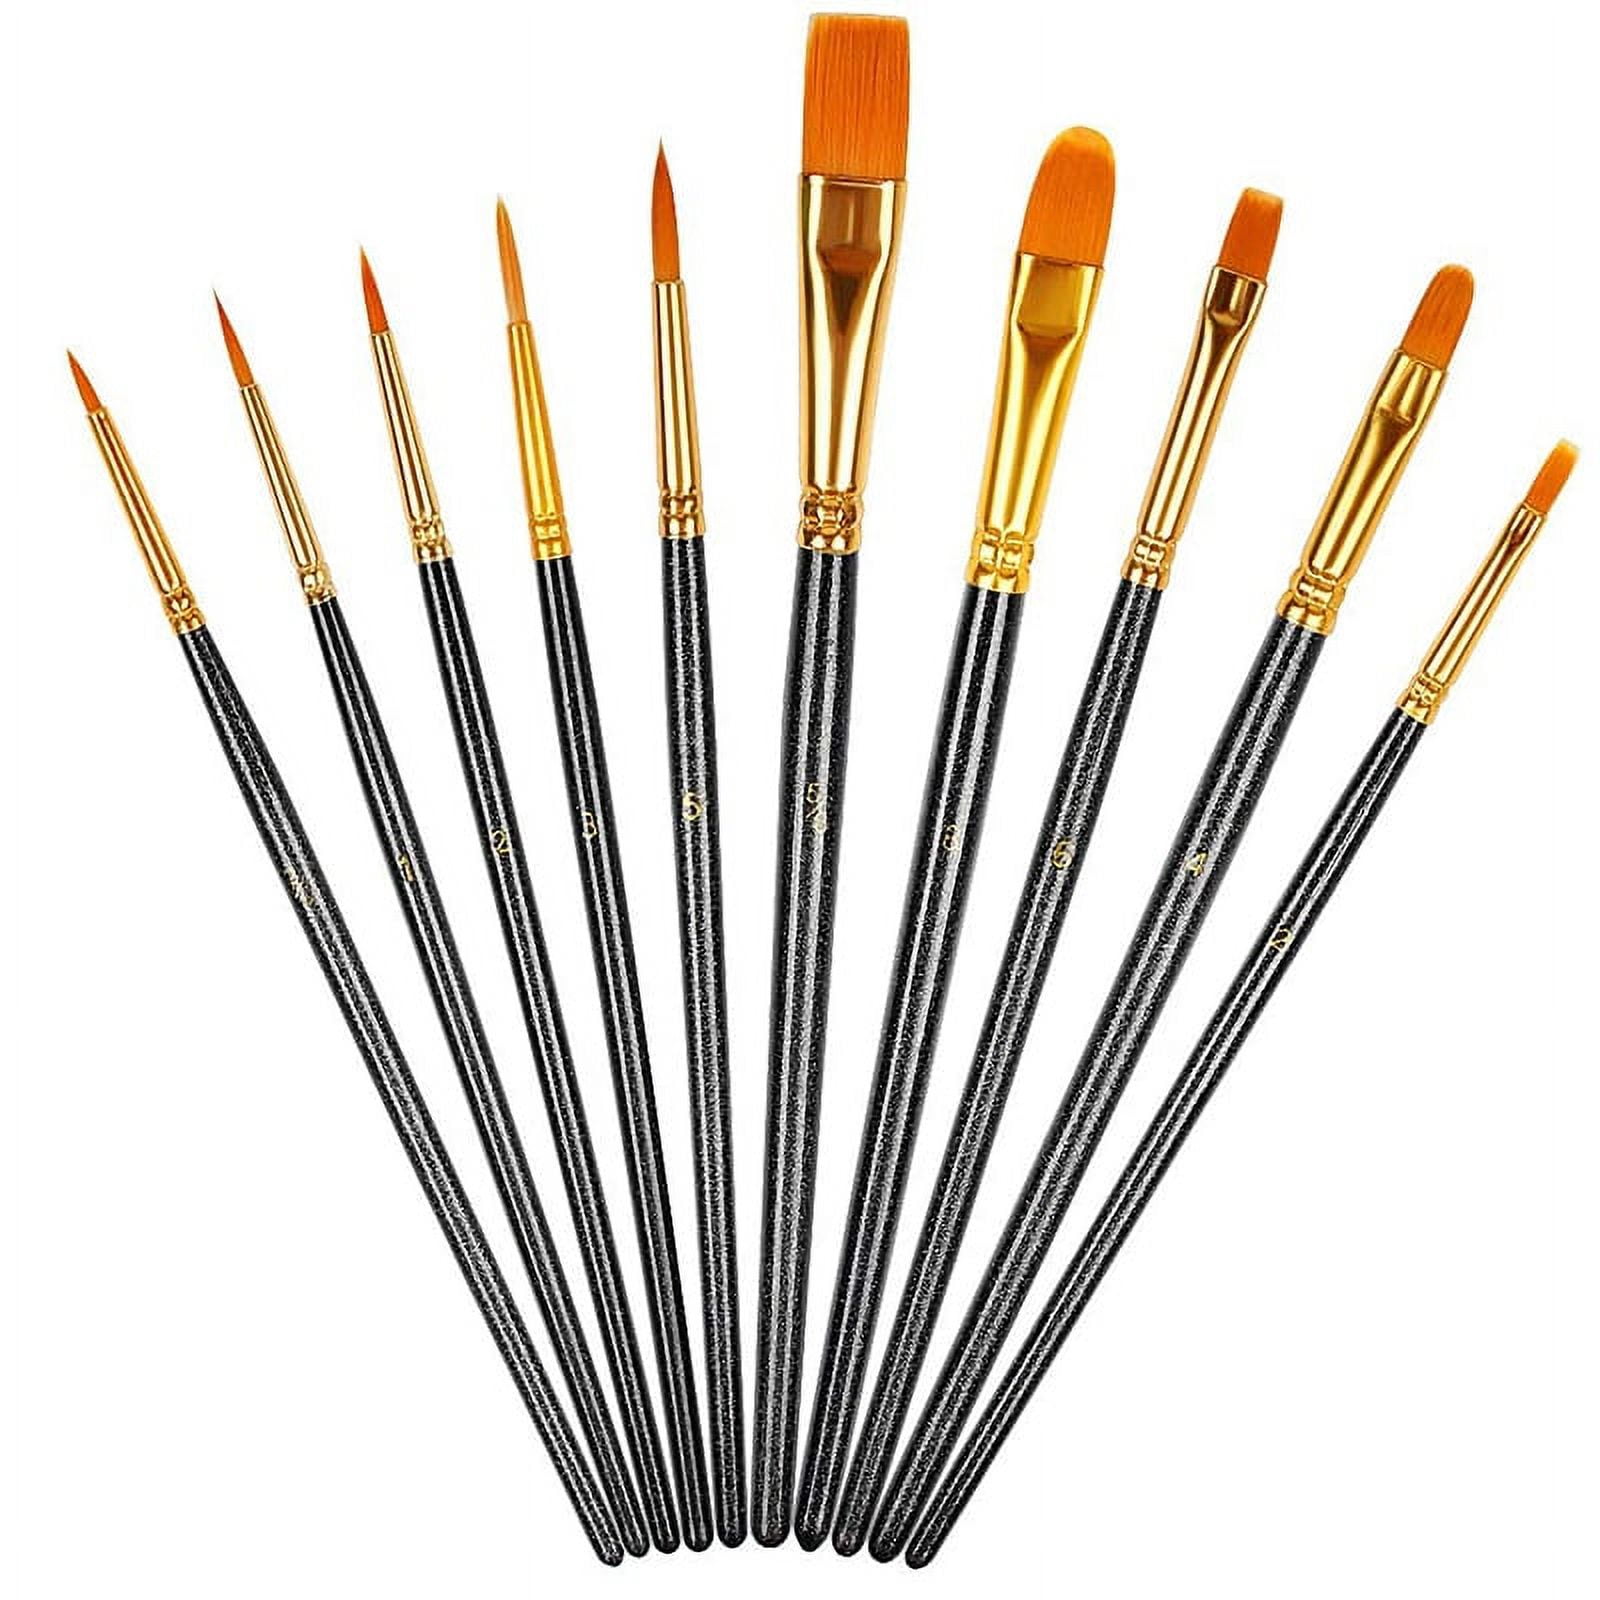 Biokia Paint Brushes Set 17pcs Round Pointed Tip Artist Paintbrushes for Acrylic Painting,Paint by Number, Watercolor, Oil, C